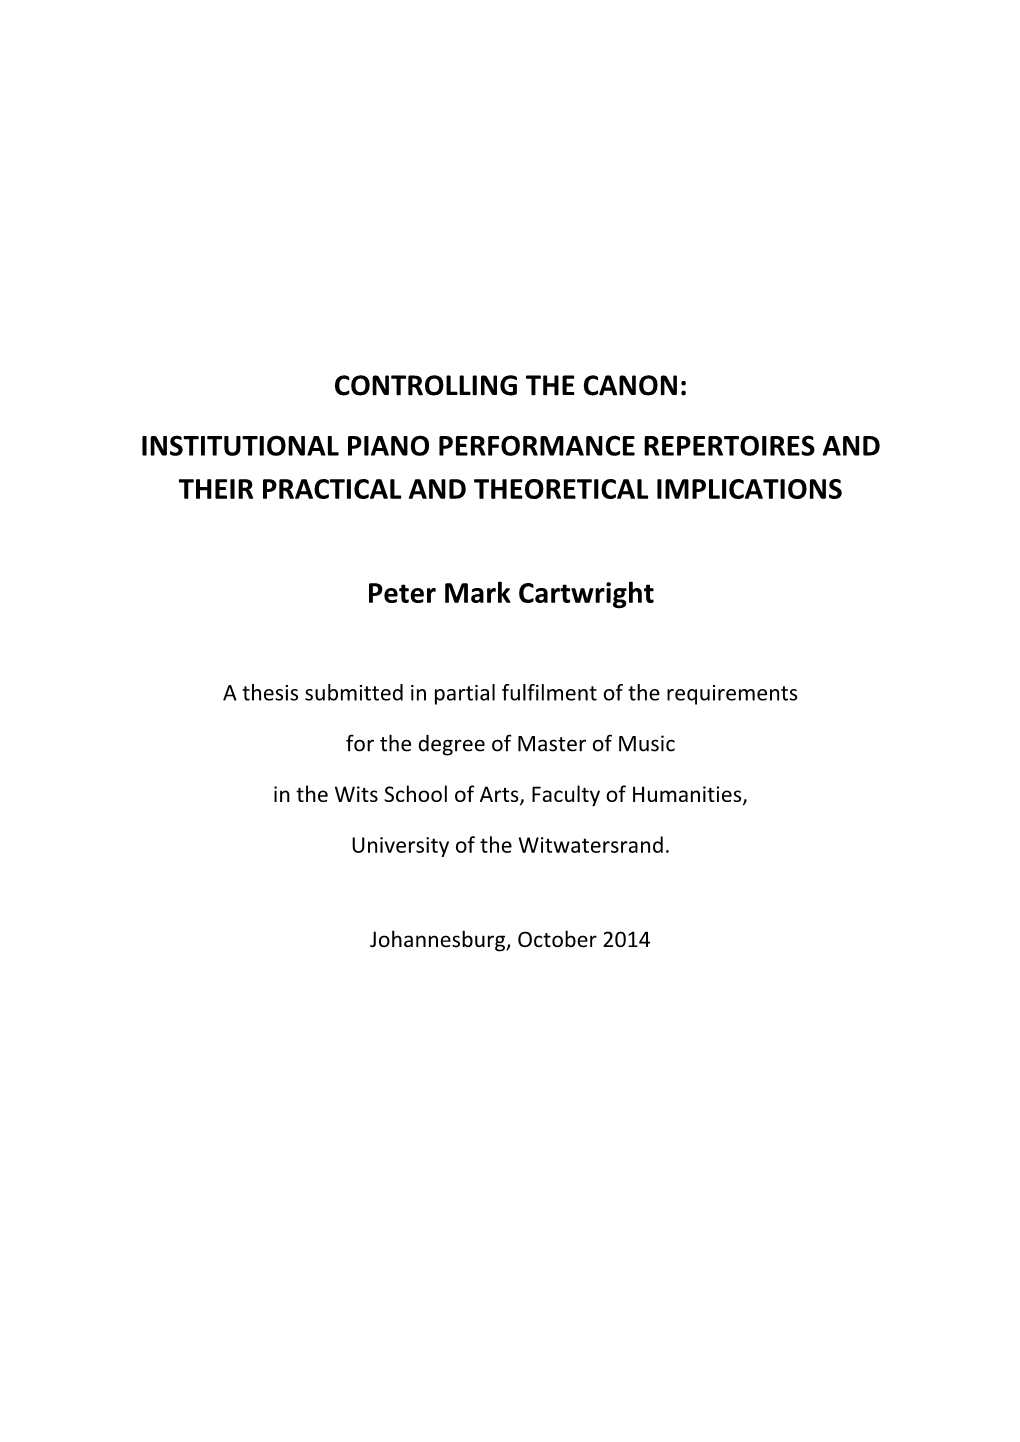 Controlling the Canon: Institutional Piano Performance Repertoires and Their Practical and Theoretical Implications